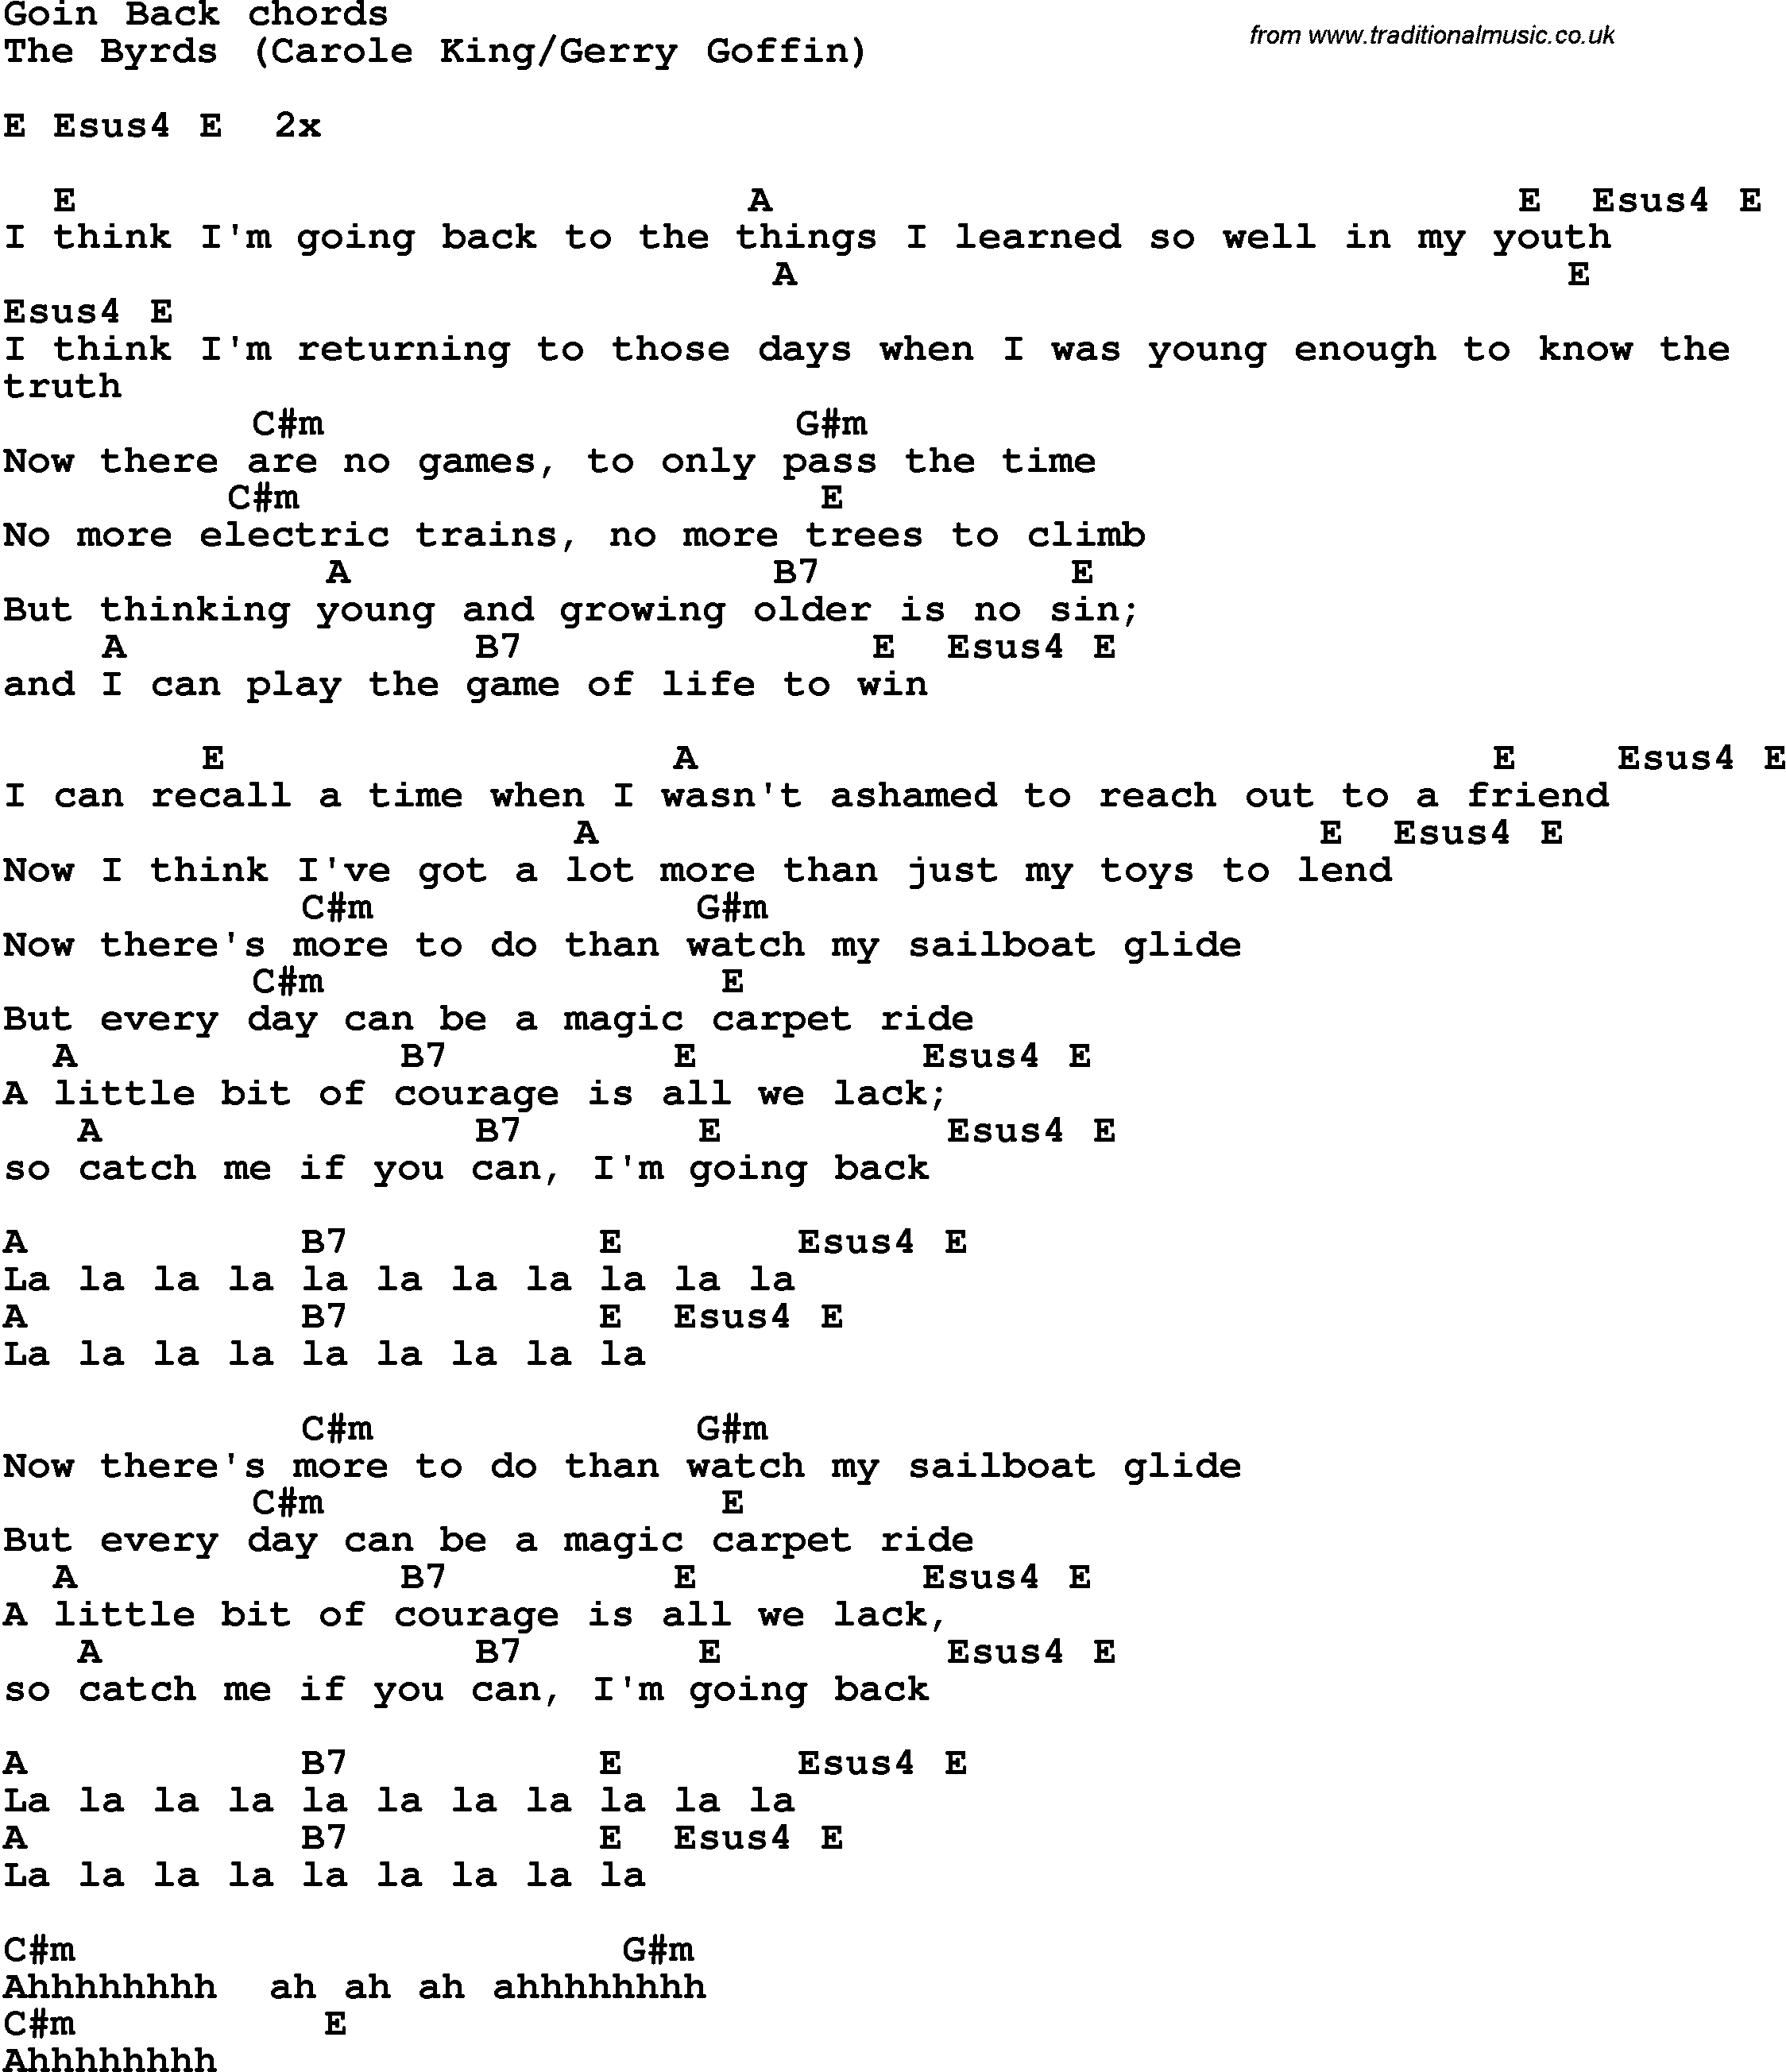 Song Lyrics with guitar chords for Goin' Back